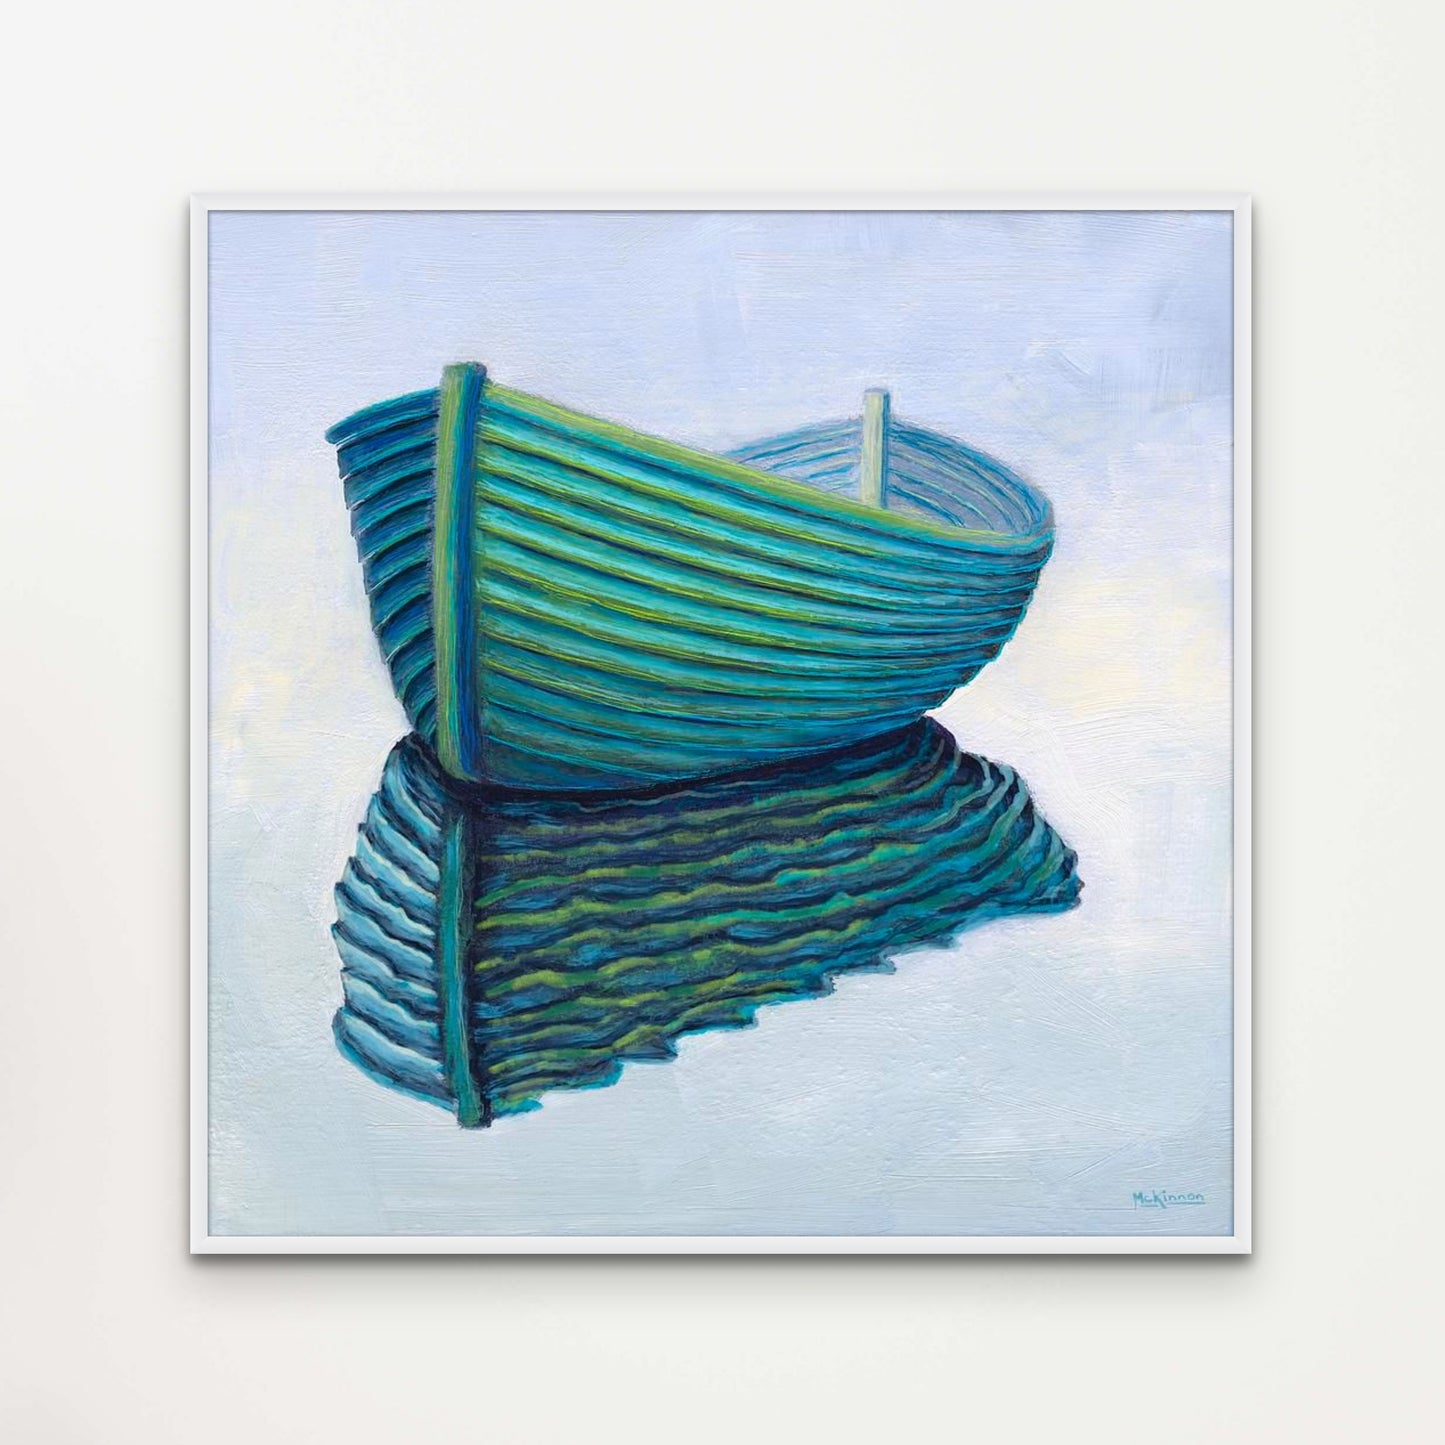 A semi abstract painting of a turquoise, lapstrake rowboat reflected in water on a very light blue background by Canadian artist Catherine McKinnon. This giclee print of the painting is framed in white and mounted on a light grey wall.